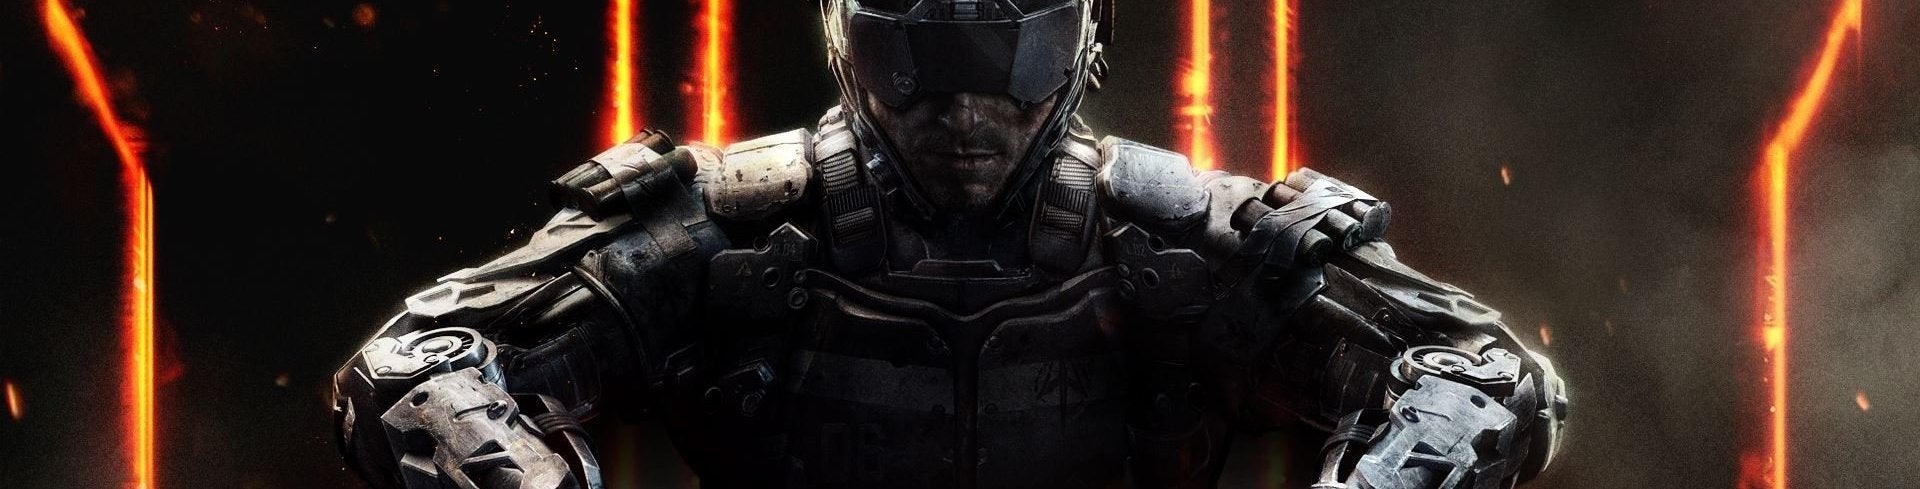 Image for Call of Duty: Black Ops 3 review